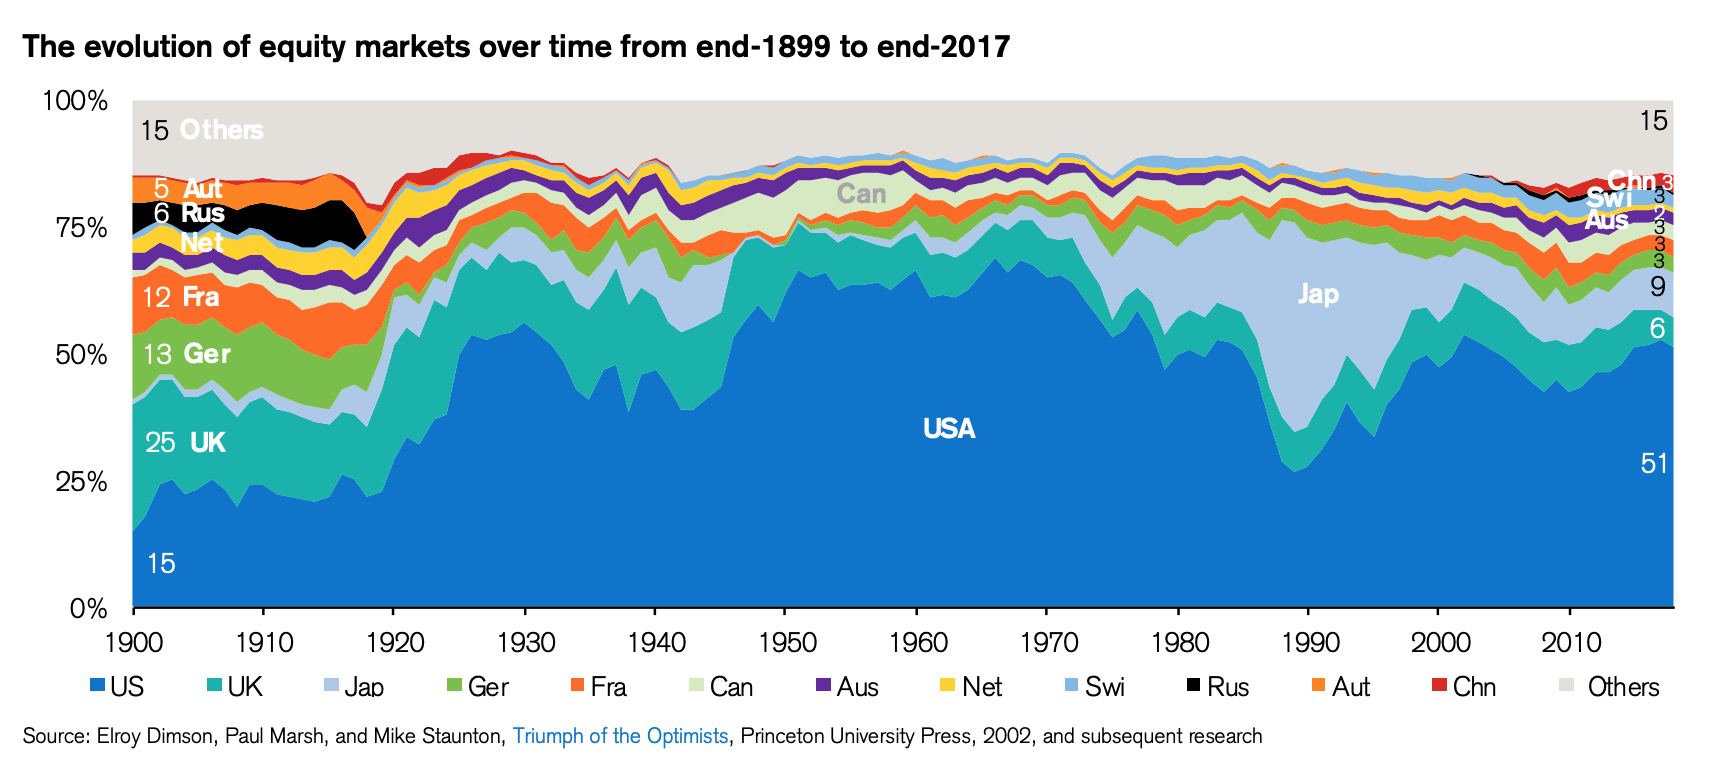 The evolution of equity markets over time from end-1899 to end-2017